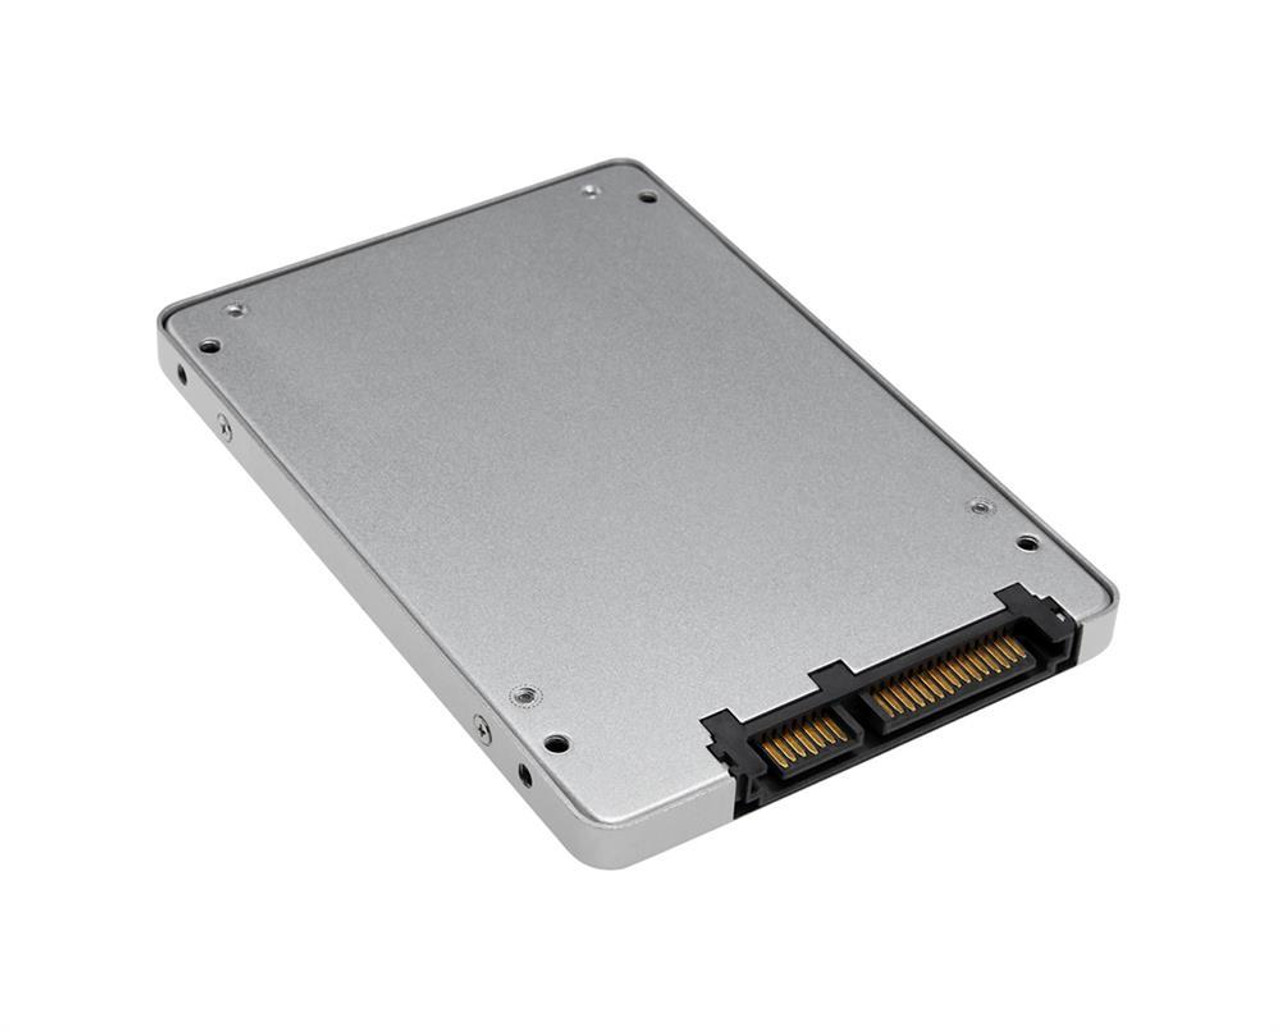 03B01000301DP ASUS 64GB MLC SATA 3Gbps 2.5-inch Internal Solid State Drive (SSD) for CG8565